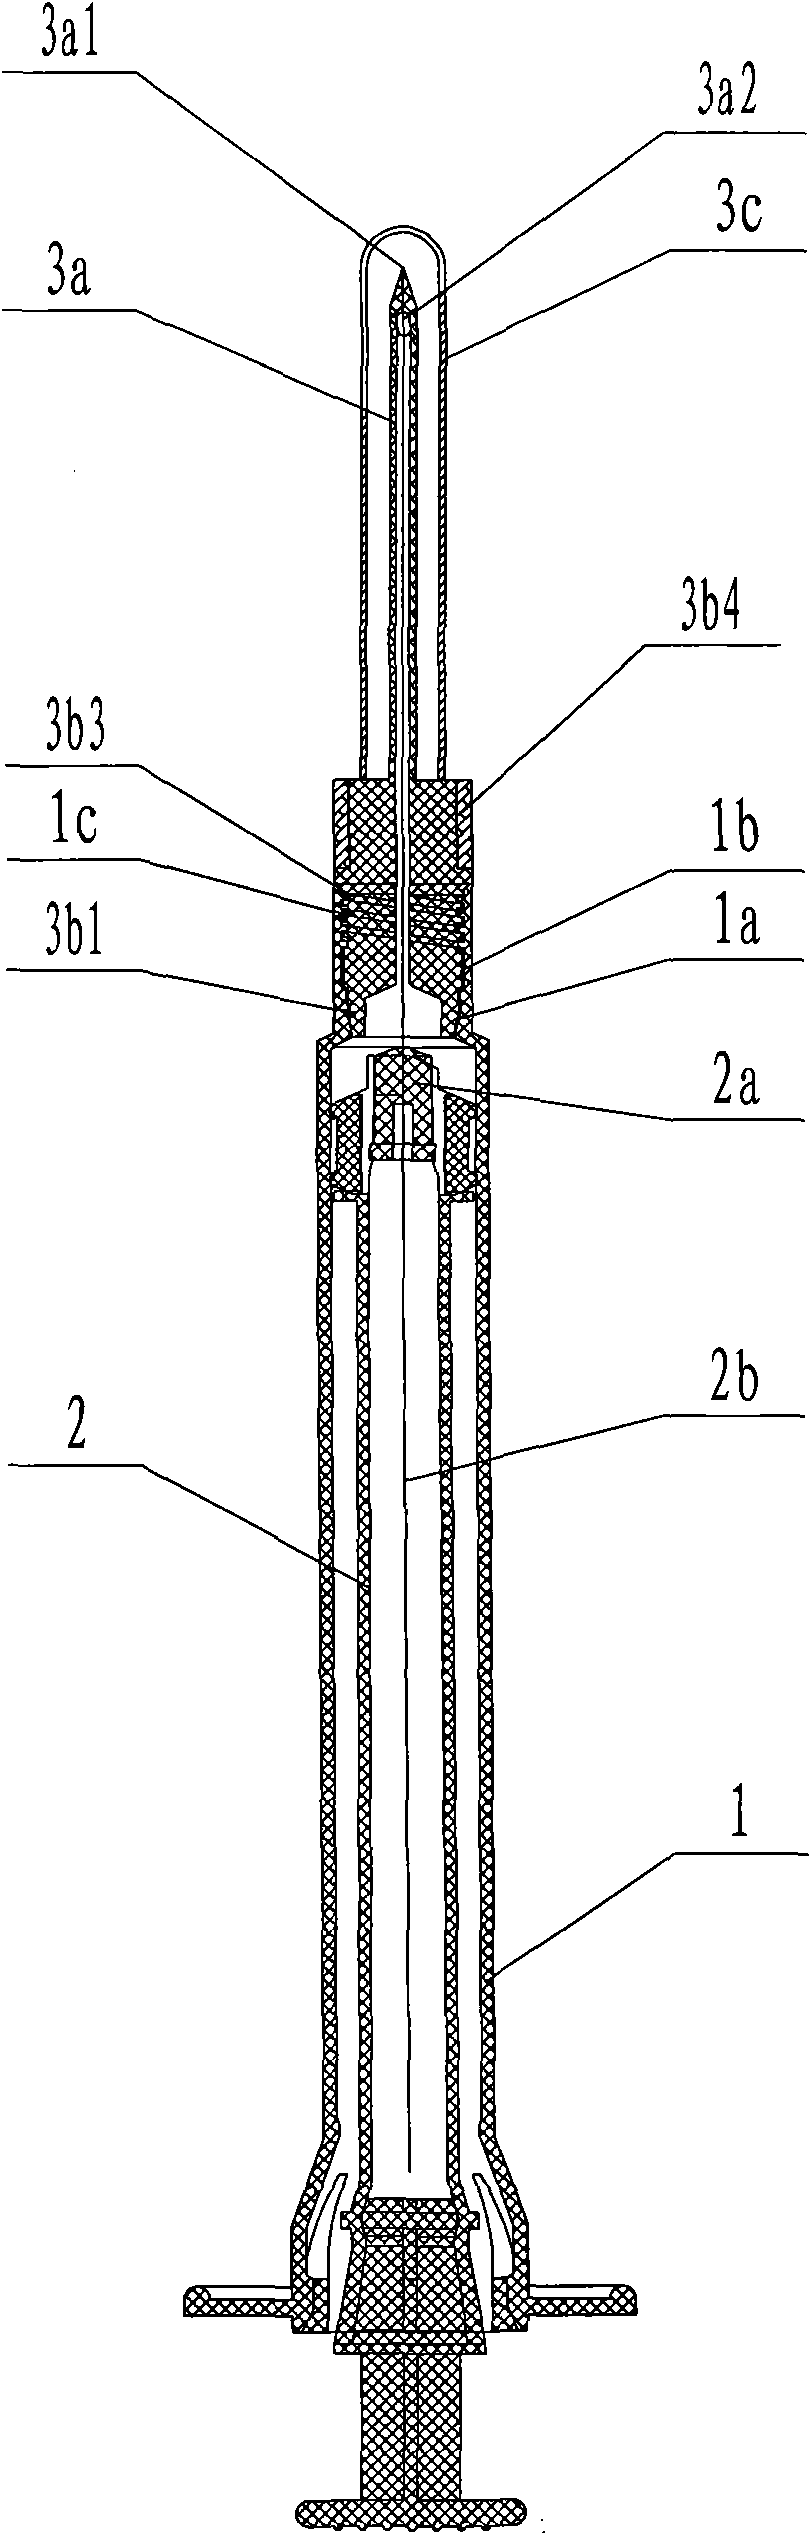 Disposable safety syringe with needle capable of being replaced and automatically retracted